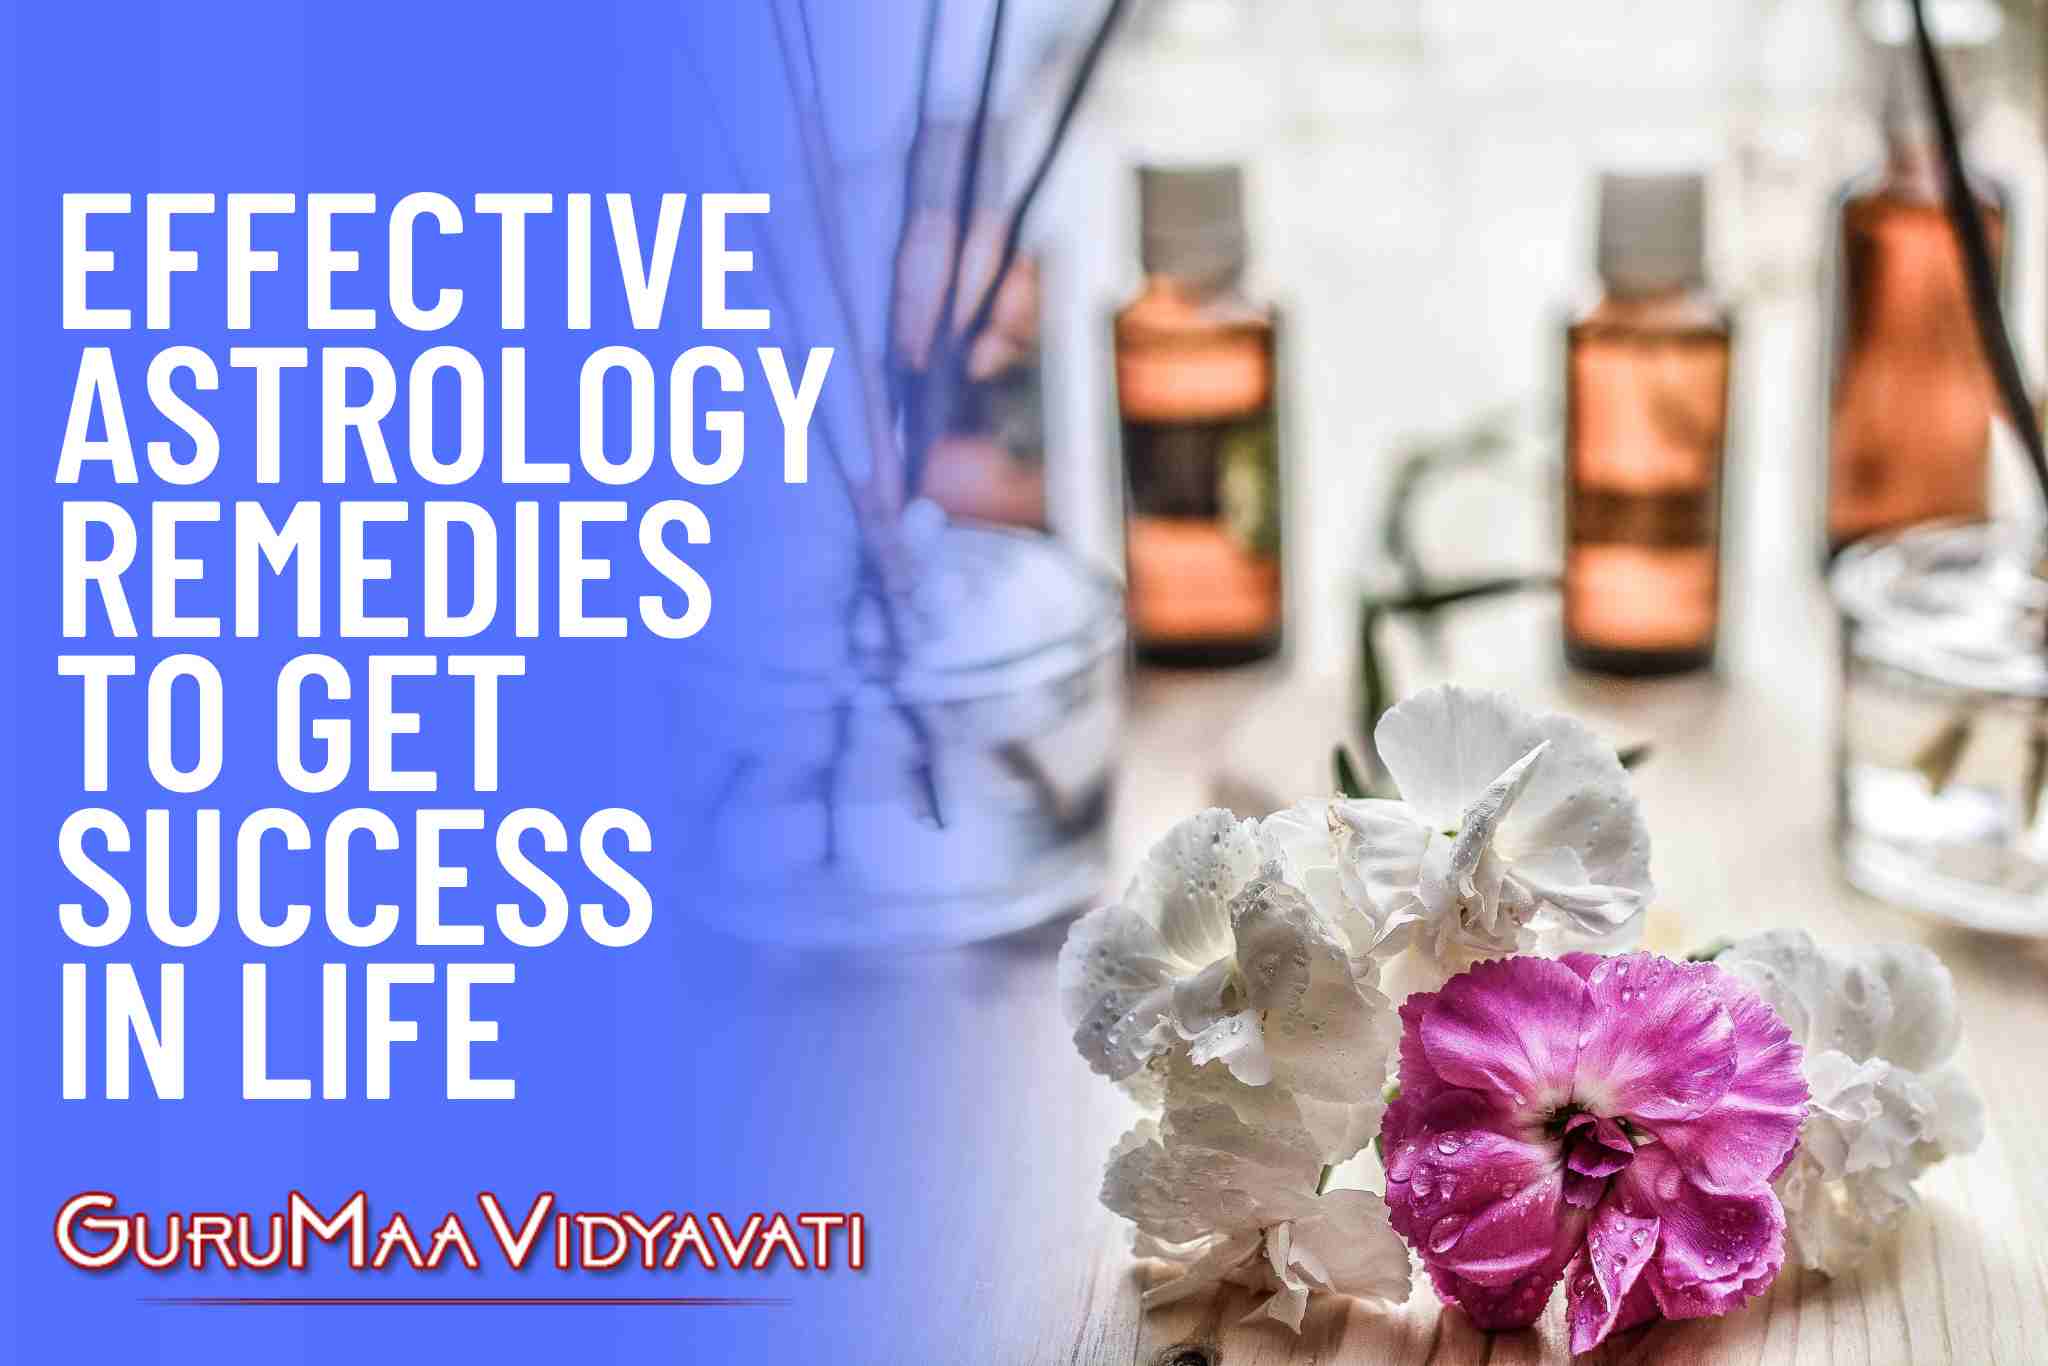 Effective Astrology Remedies to Get Success in Life